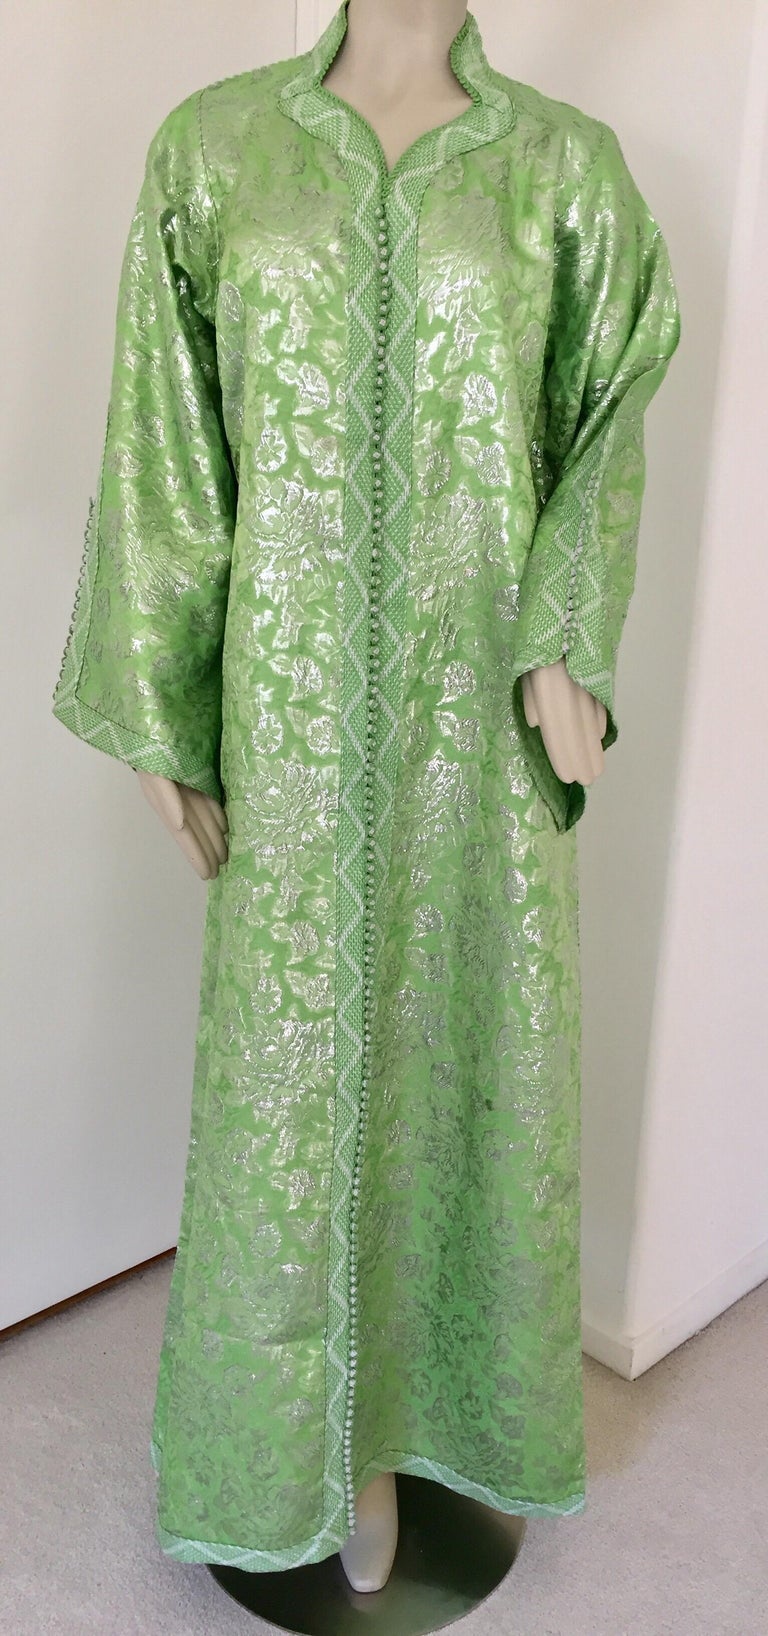 20th Century Elegant Moroccan Caftan Lime Green and Silver Metallic Floral Brocade For Sale